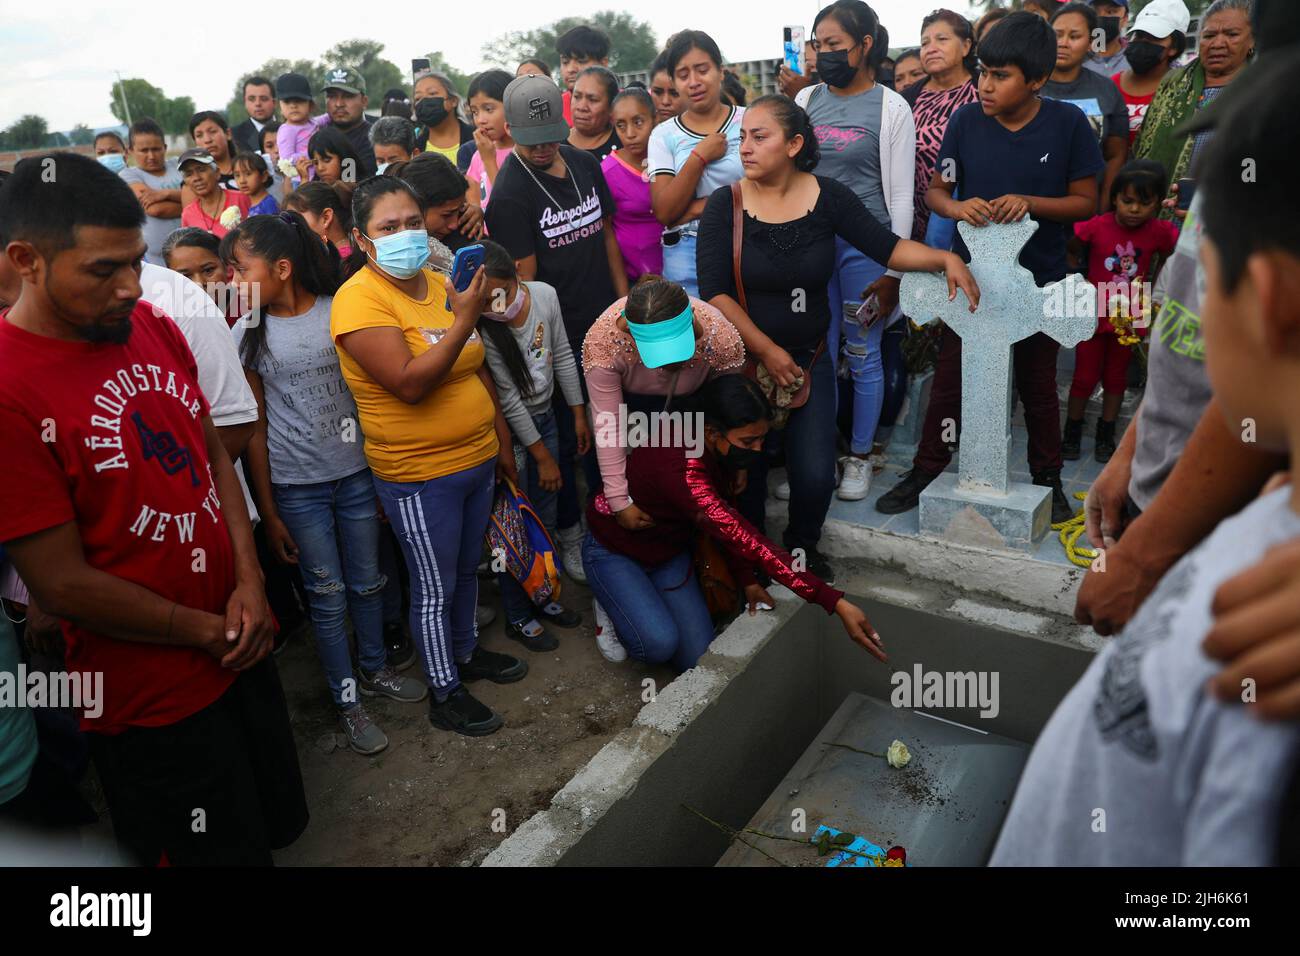 People react over the coffin of late migrant Jose Lopez, 34, who died in a trailer truck in Texas, during his burial, in Celaya, Guanajuato state, Mexico, July 15, 2022. REUTERS/Edgard Garrido Stock Photo